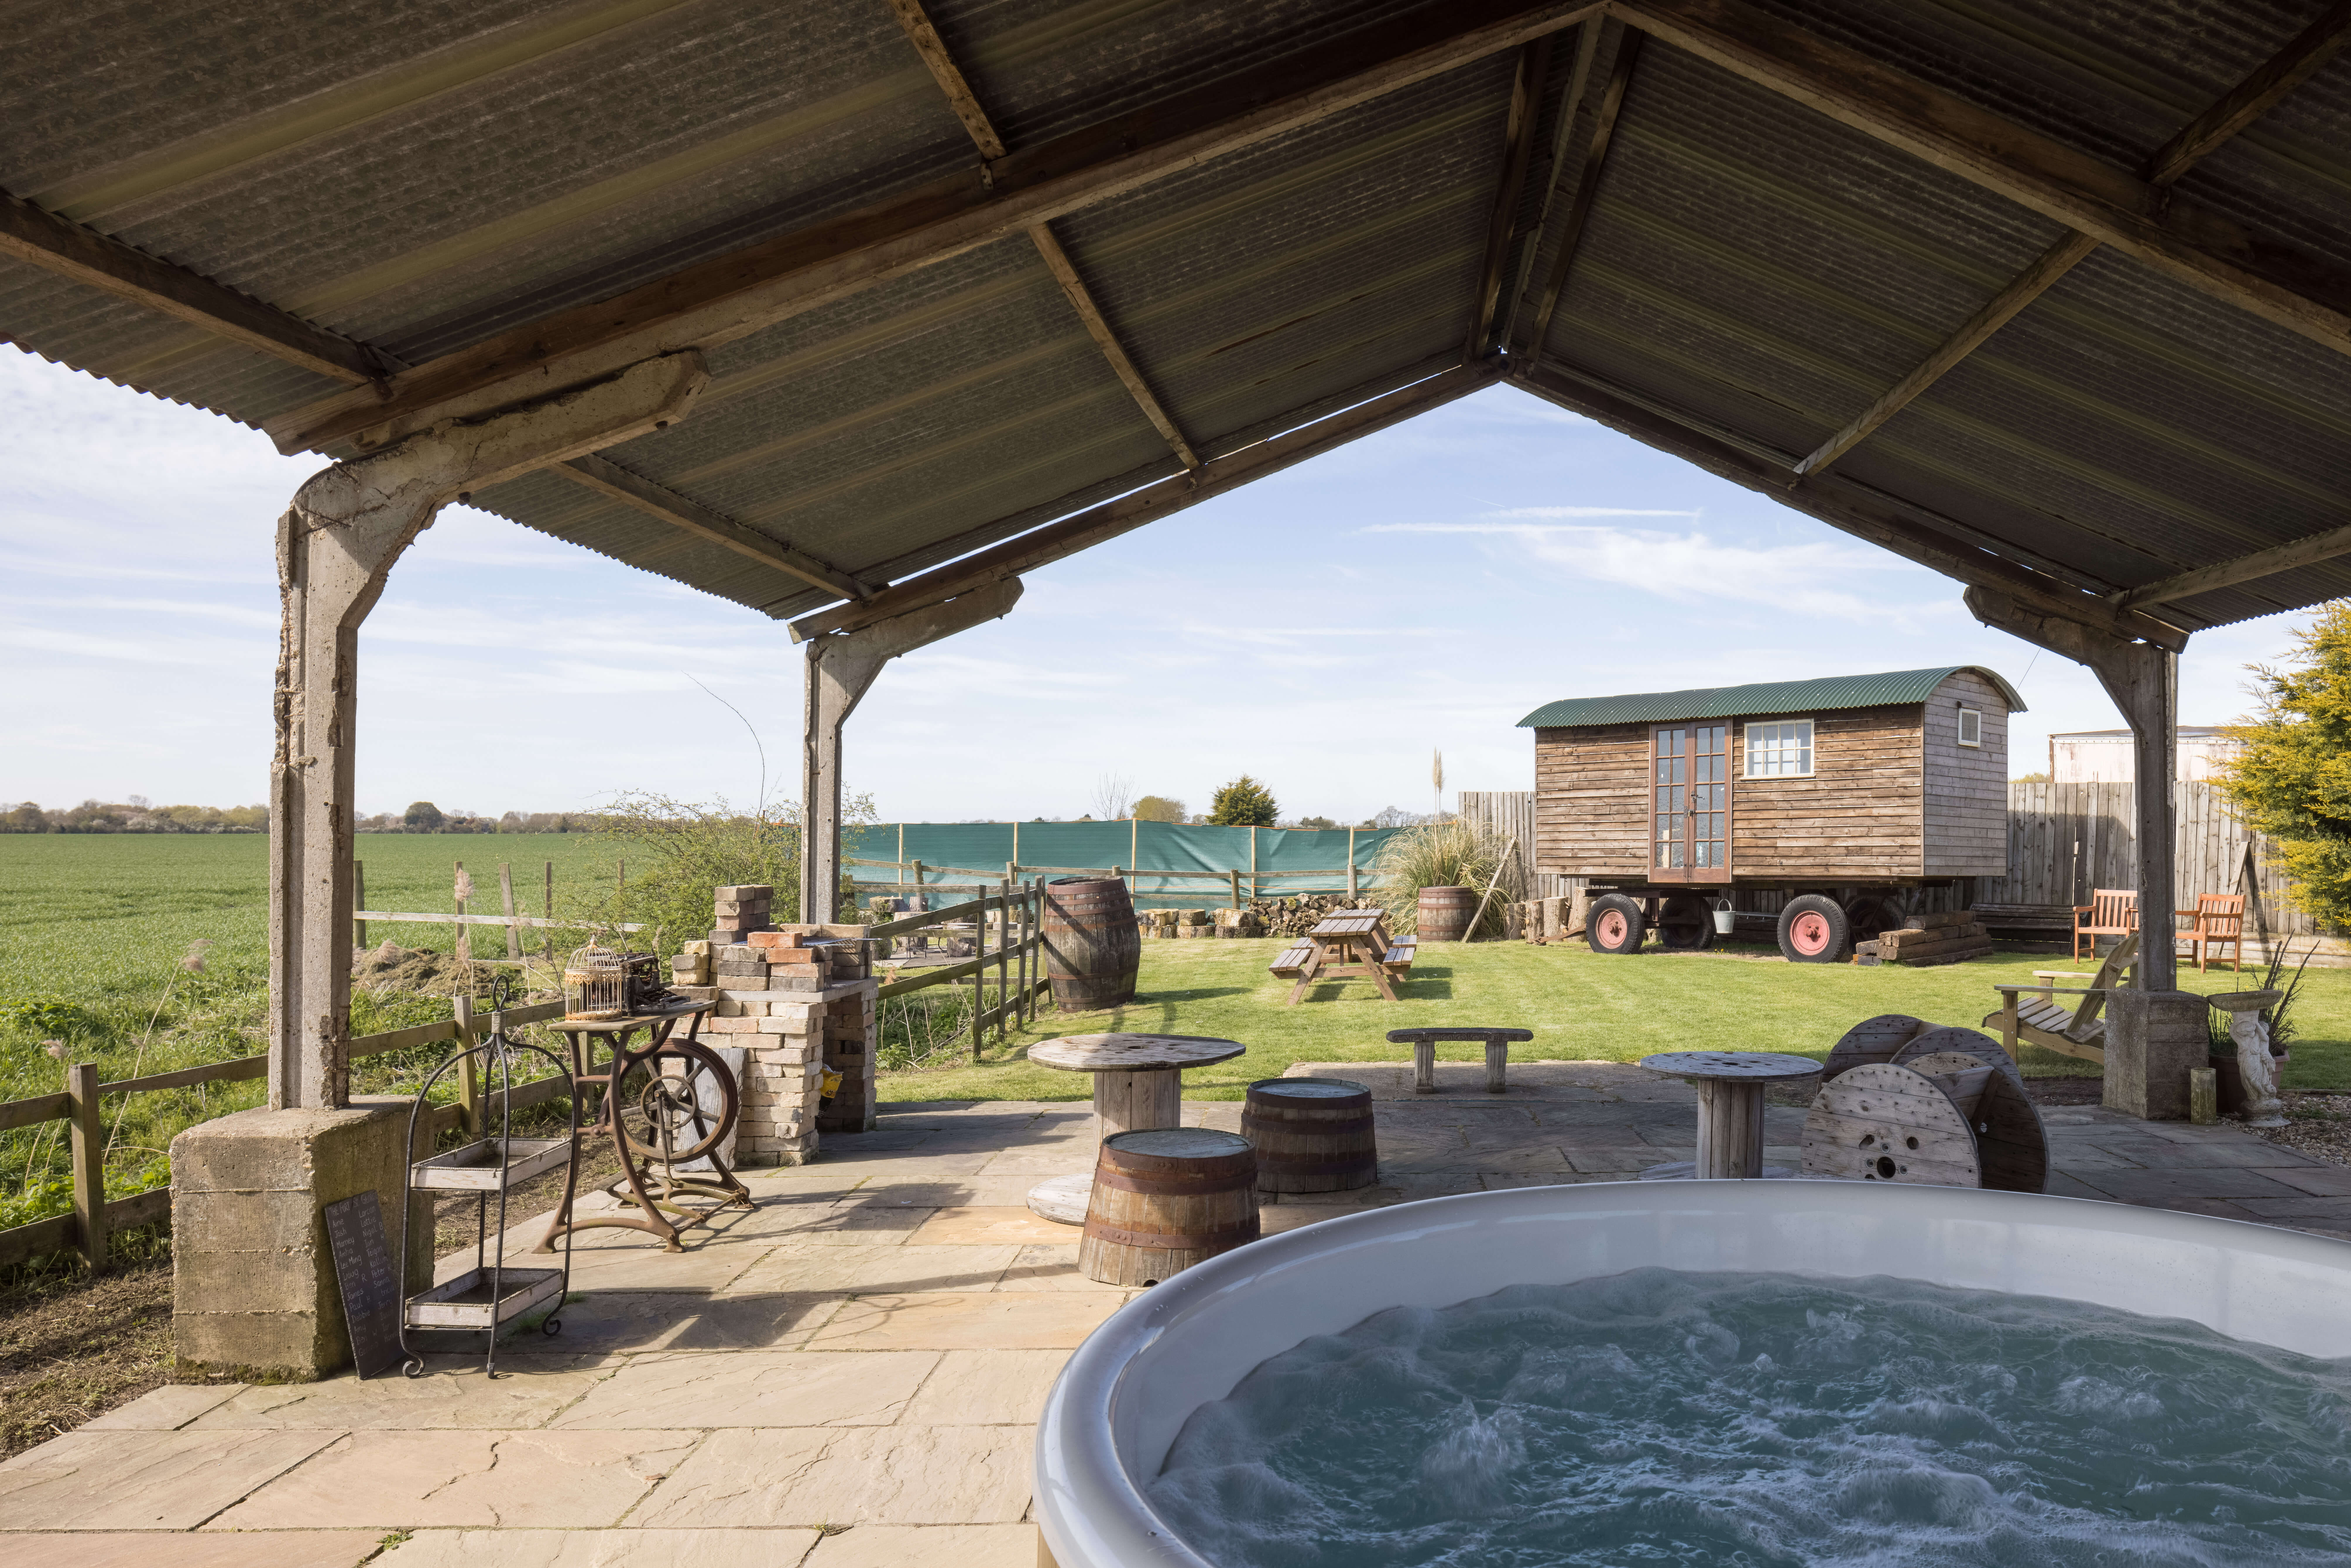 Clopton Courtyard - Dutch barn outside seating area with wood fired hot tub